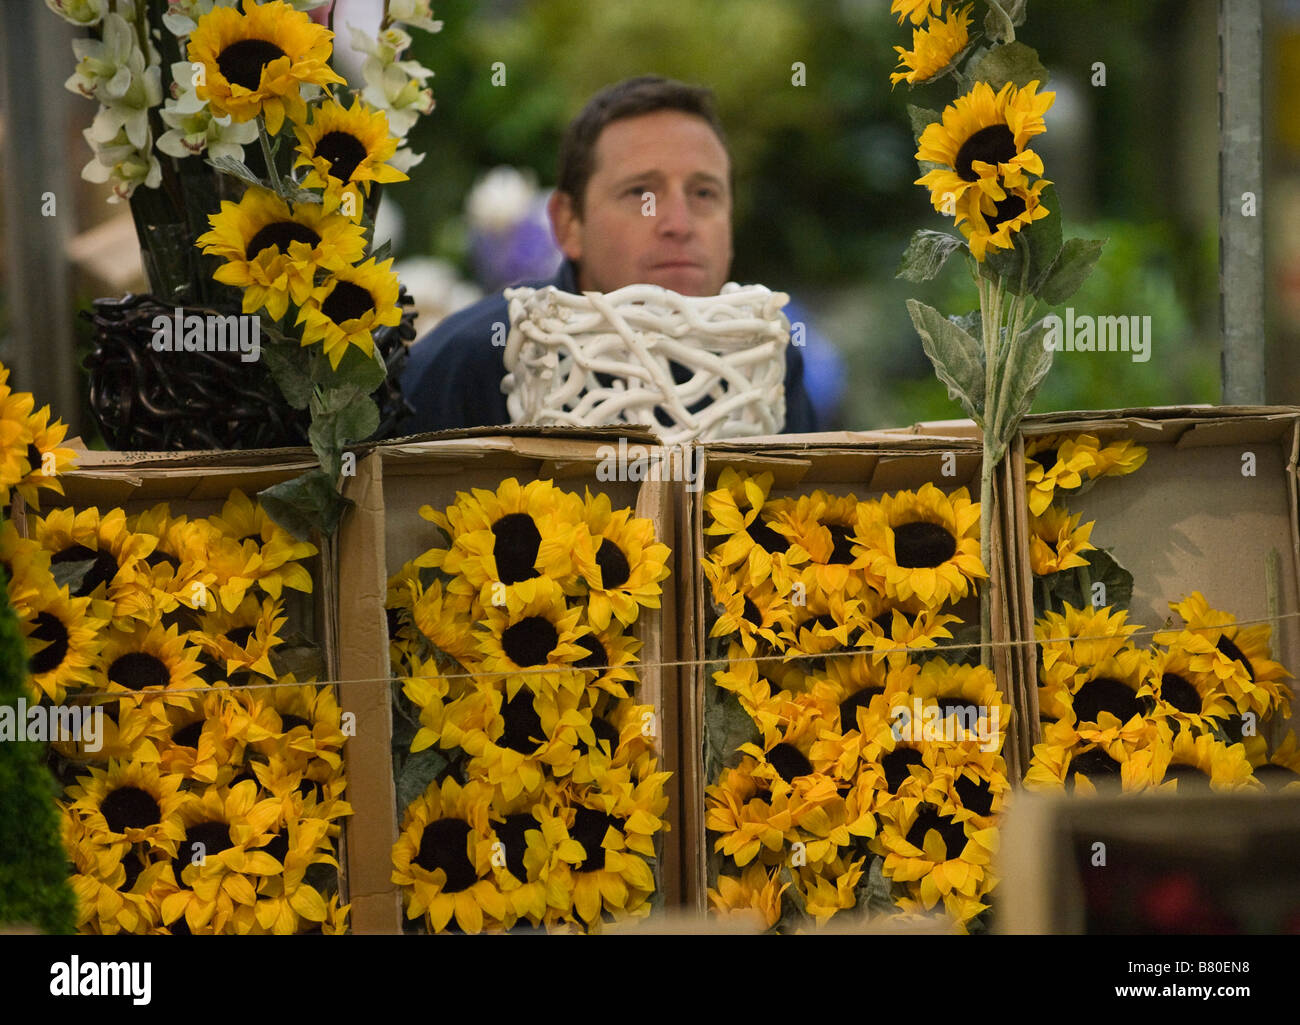 Artificial sunflowers on display at New Covent Garden Flower Market Stock Photo